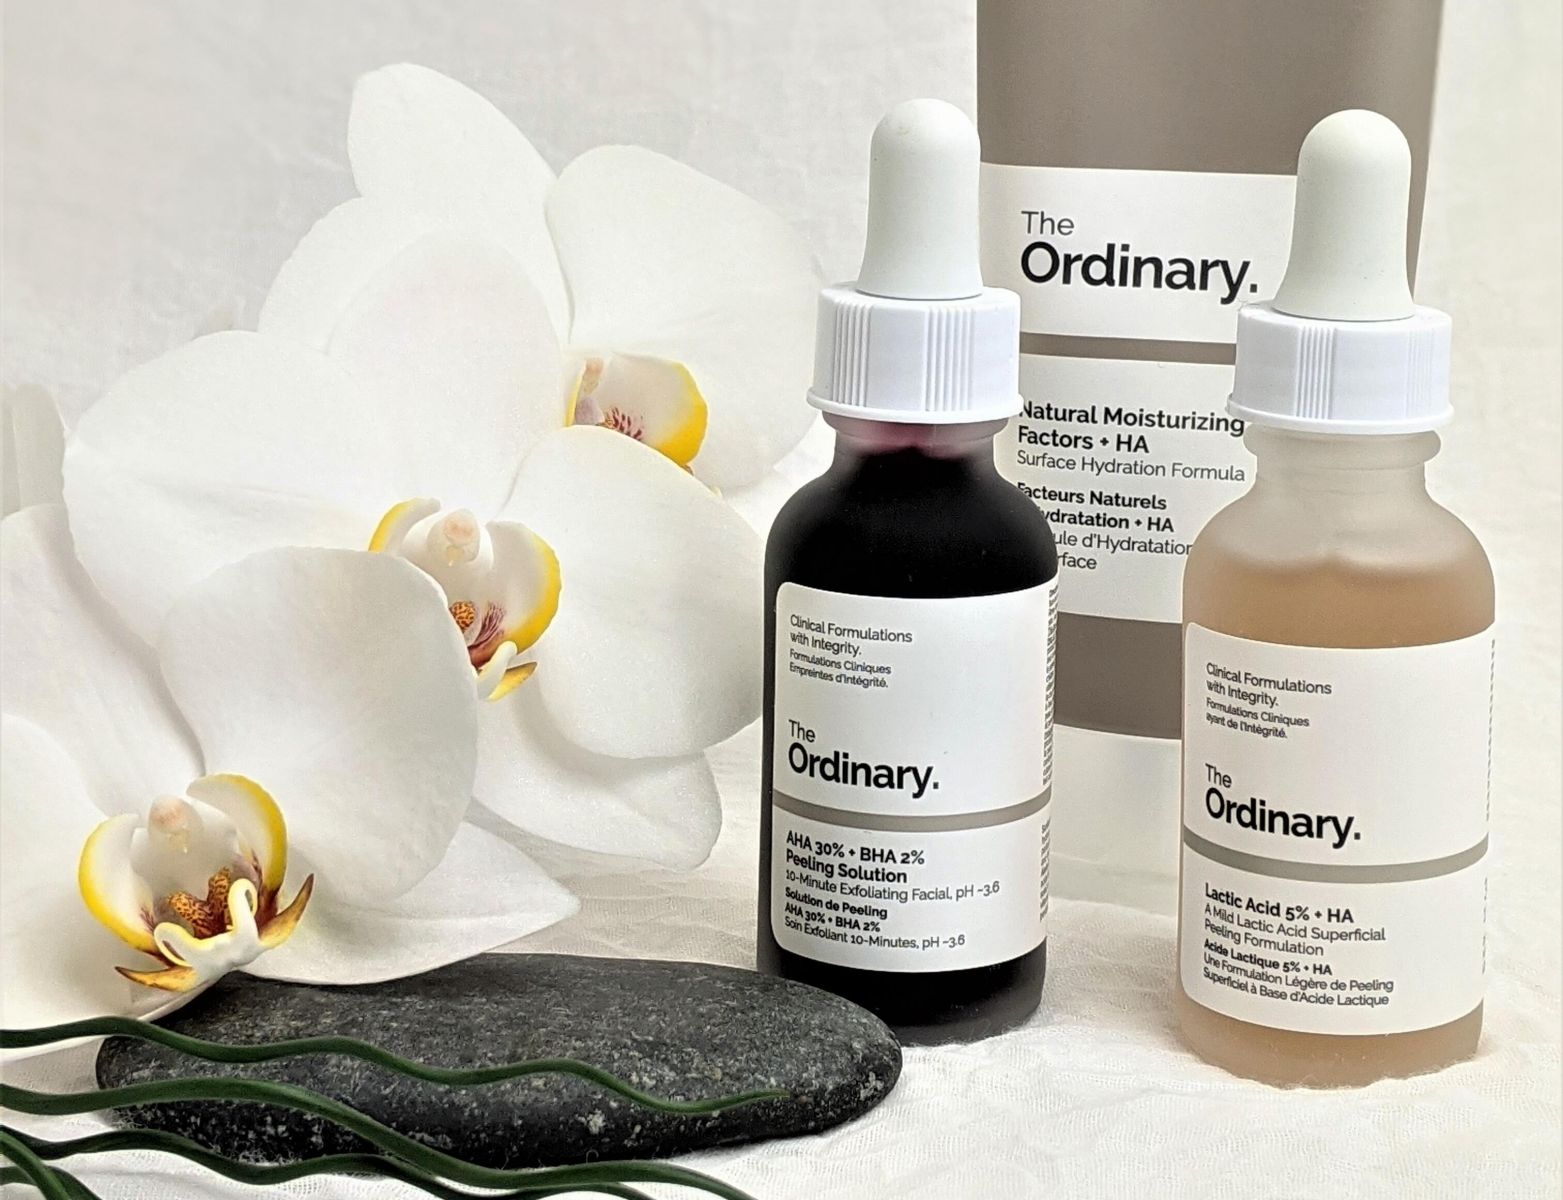 Shop The Ordinary with a LOOKFANTASTIC discount code